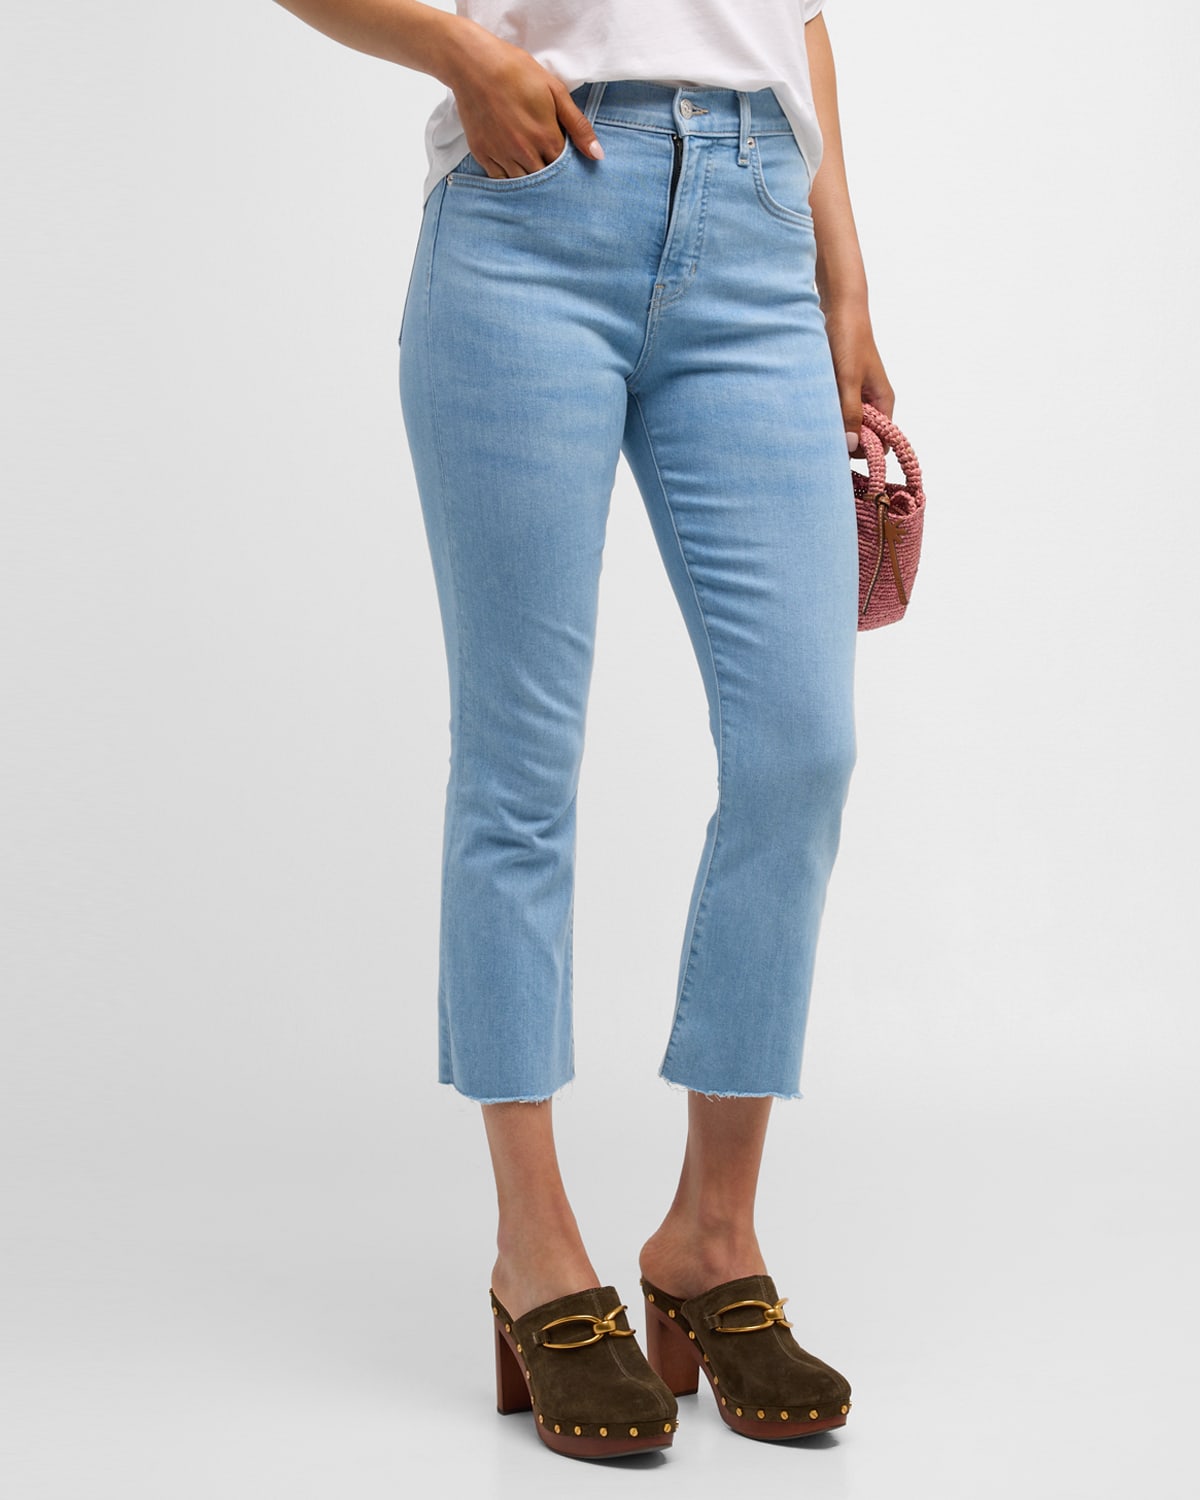 Veronica Beard Jeans Carly Crop Jeans In Bail Out